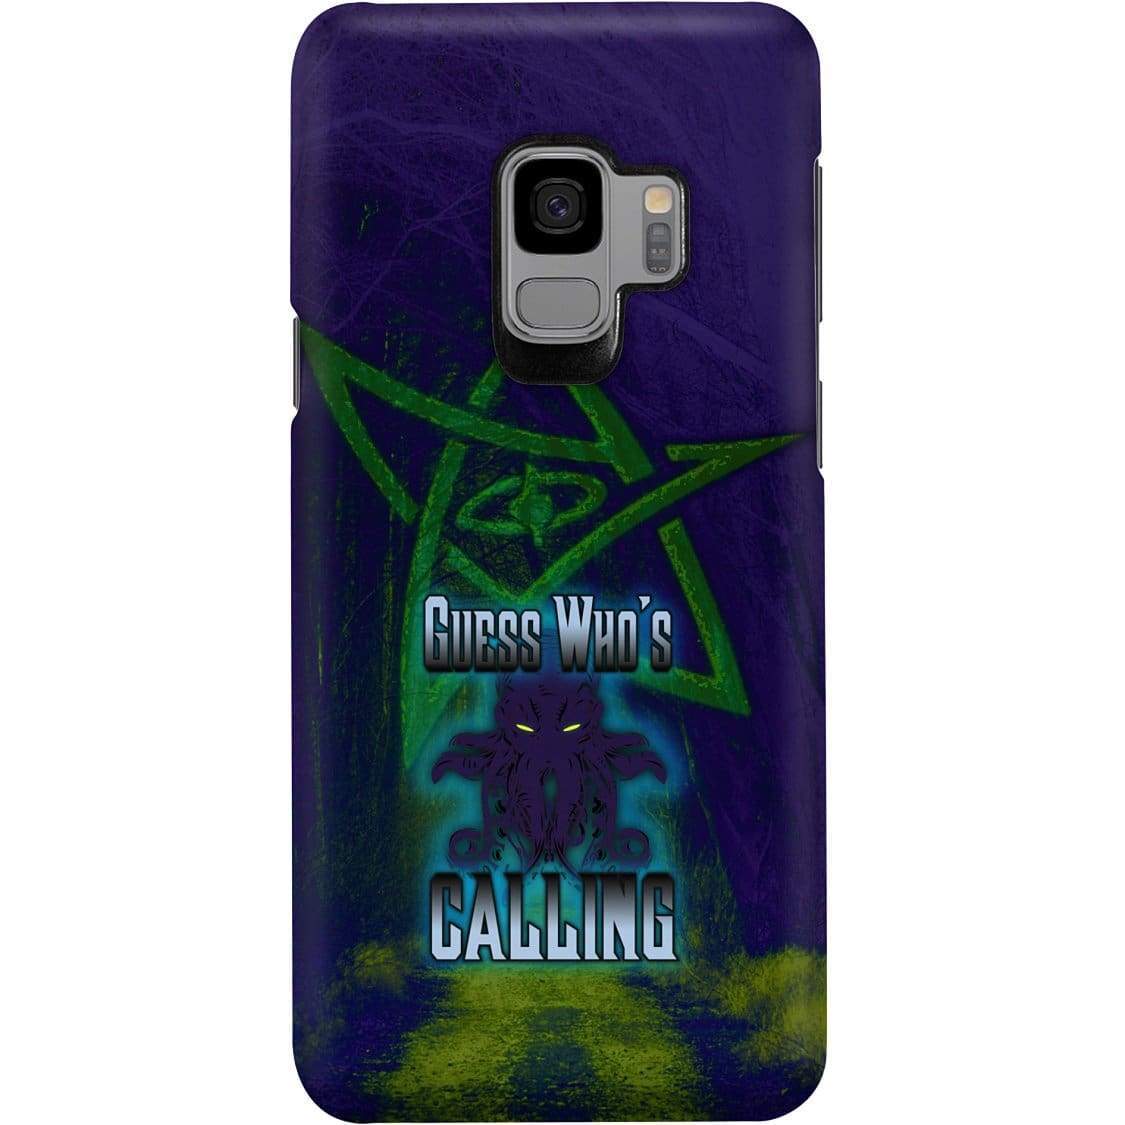 Cthulhu - Guess Who’s Calling Phone Case - Snap * iPhone * Samsung * - Samsung Galaxy S9 Case / Gloss / Apparel